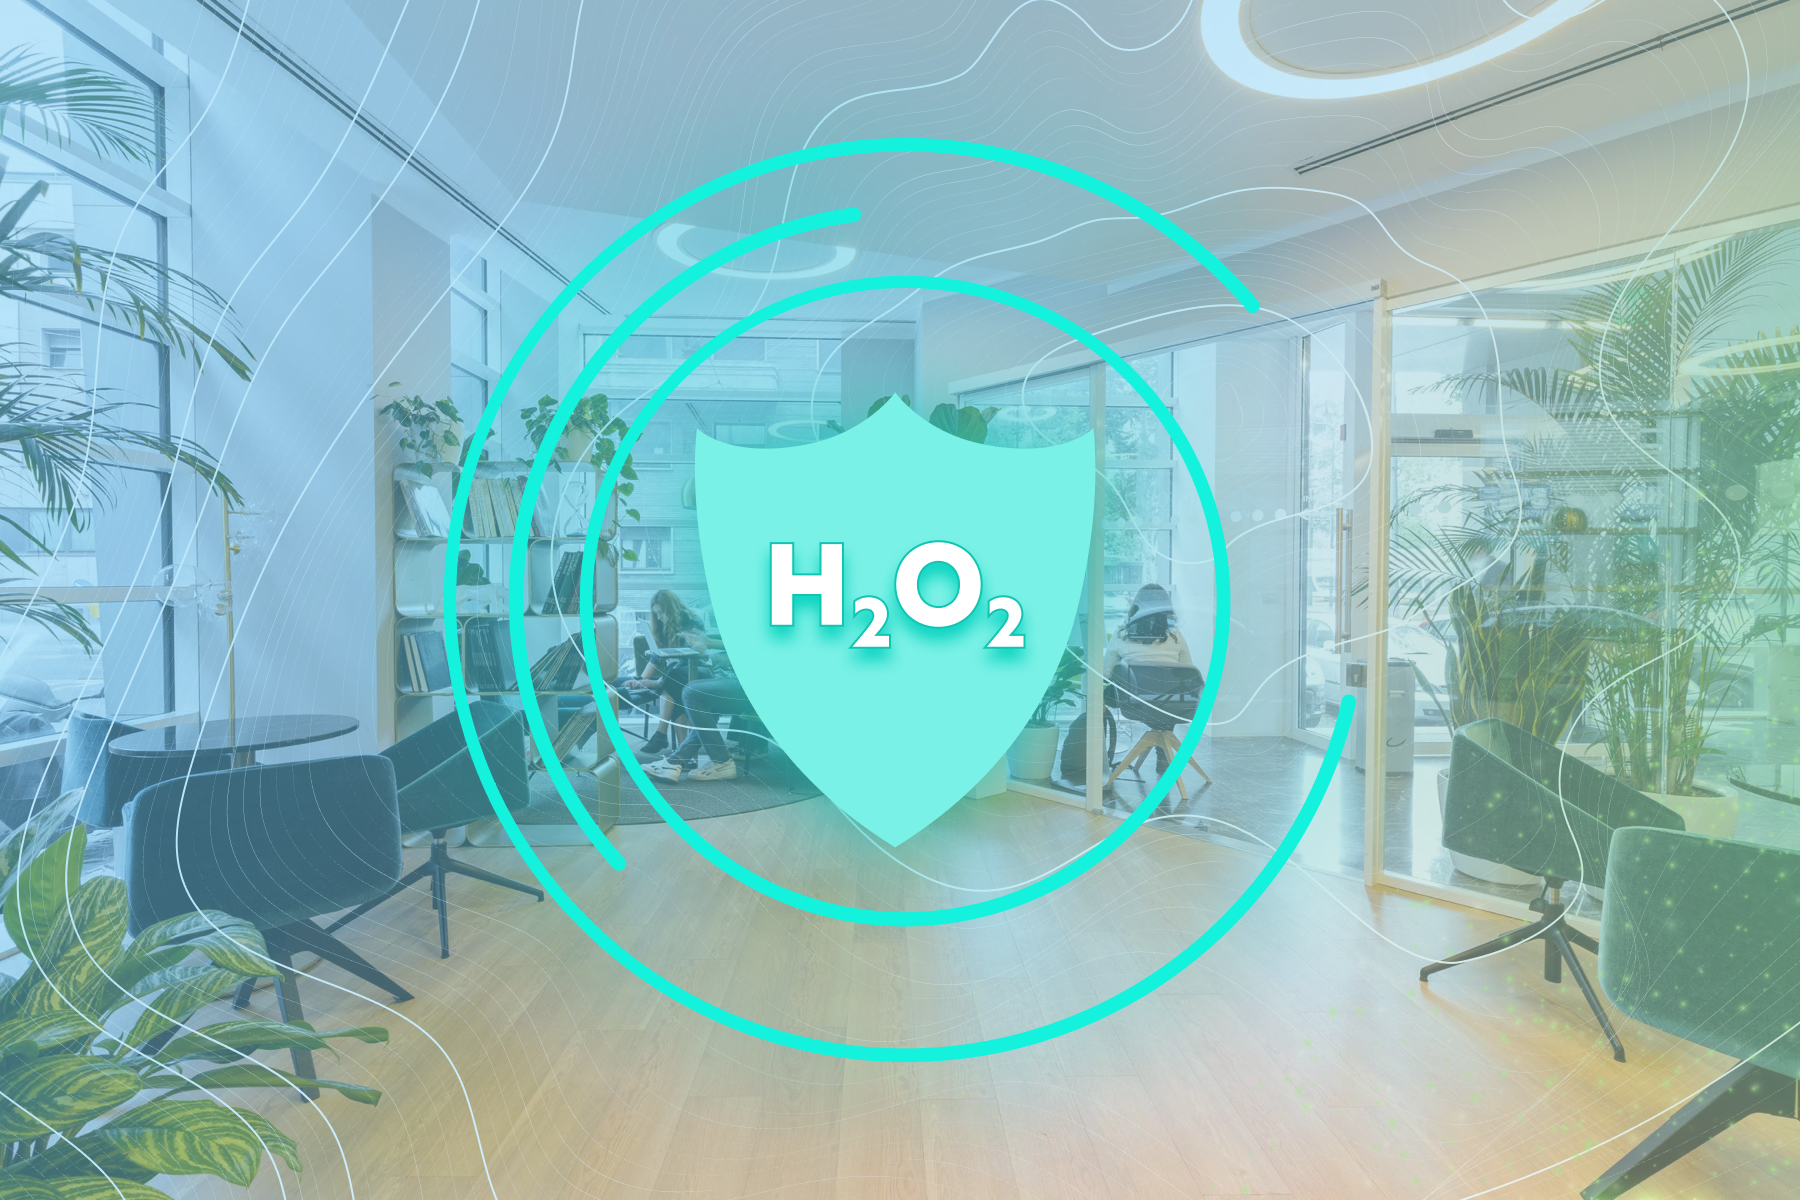 H₂O₂: Your Secret Weapon Against Harmful Airborne Pollutants